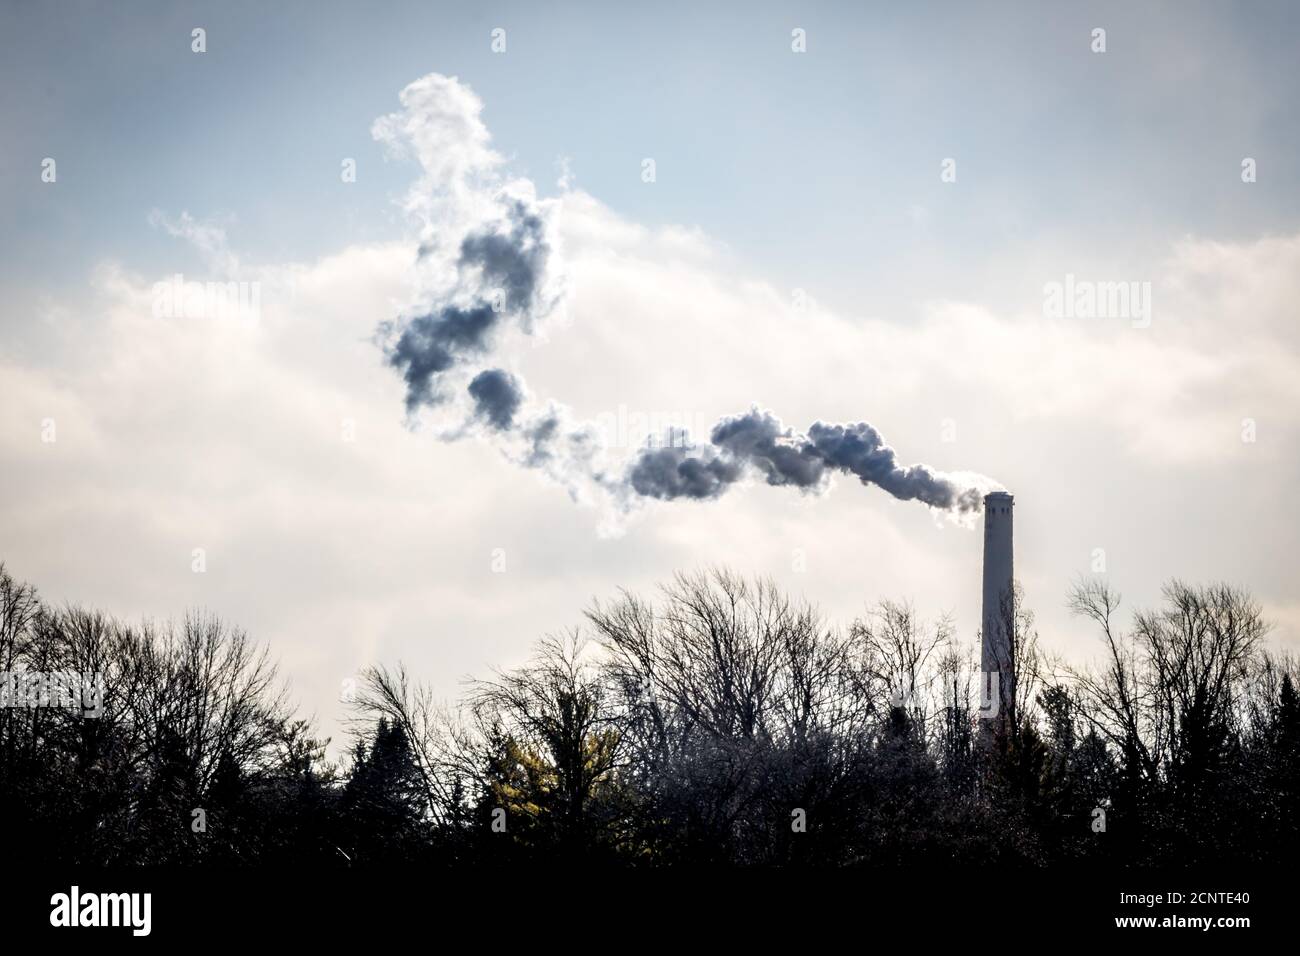 Smoke from a stack in winter Stock Photo